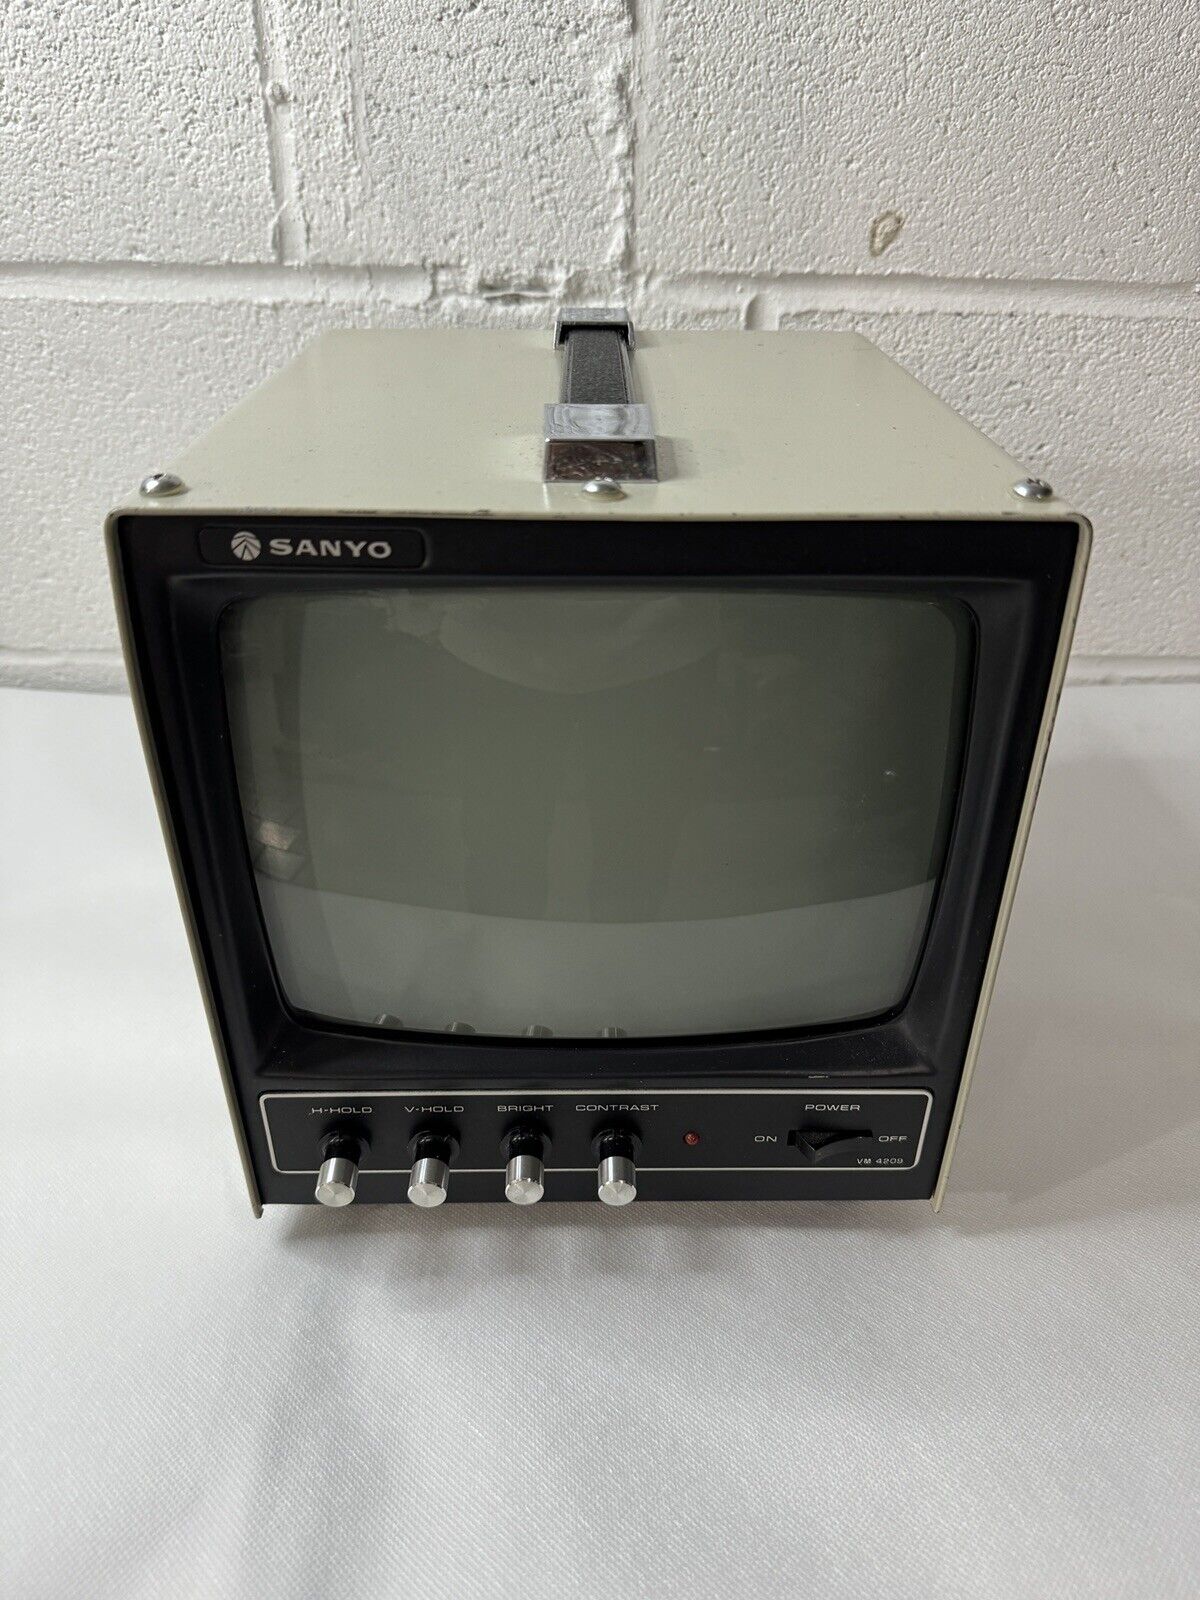 VINTAGE SANYO MONITOR FOR APPLE 1 OR APPLE 2